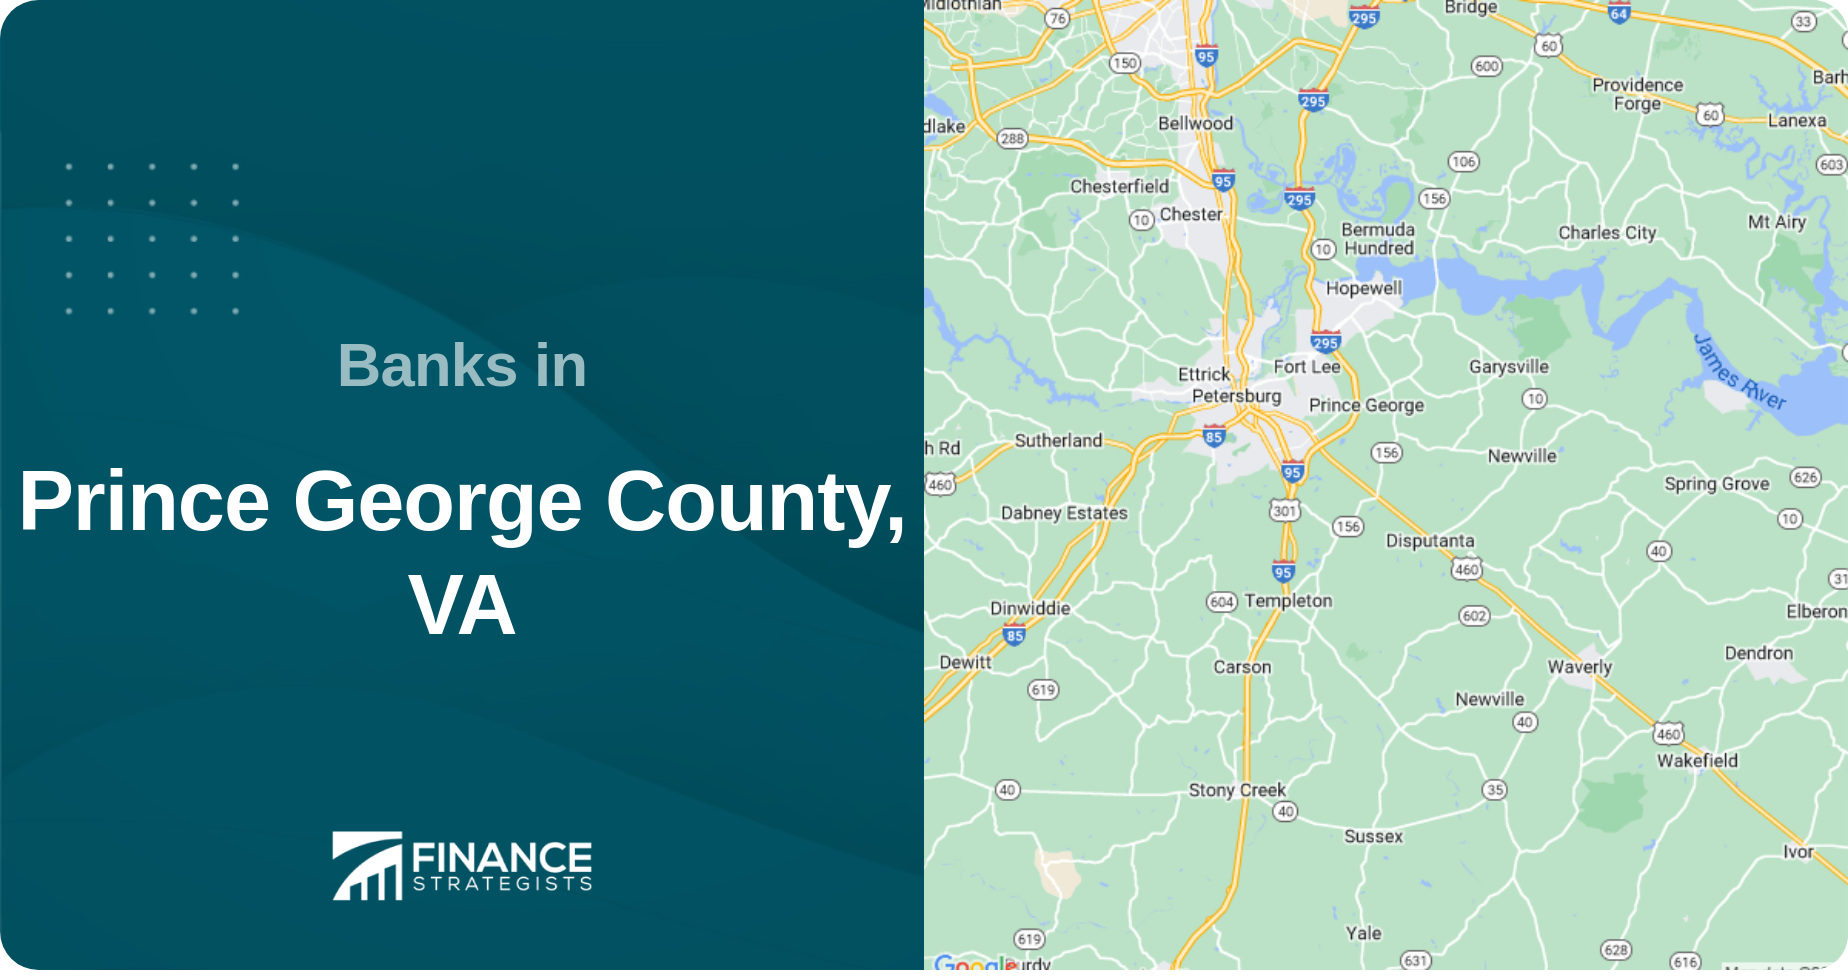 Banks in Prince George County, VA